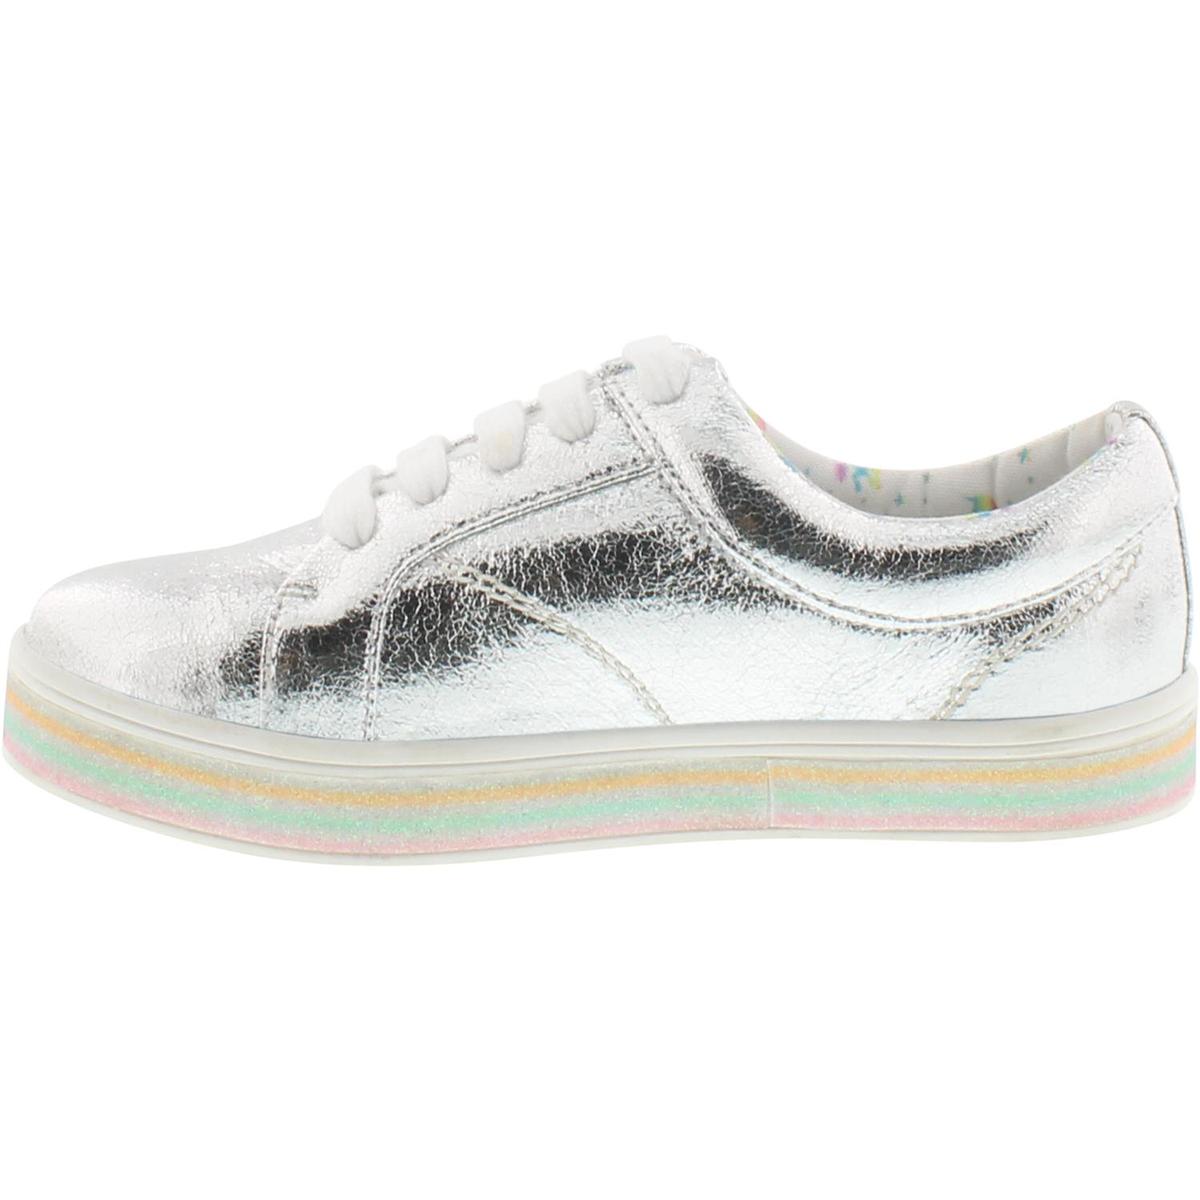 Jessica Simpson Casey Sophie Low Top Oxford Sneaker (Little Girls and Big Girls) - image 2 of 2